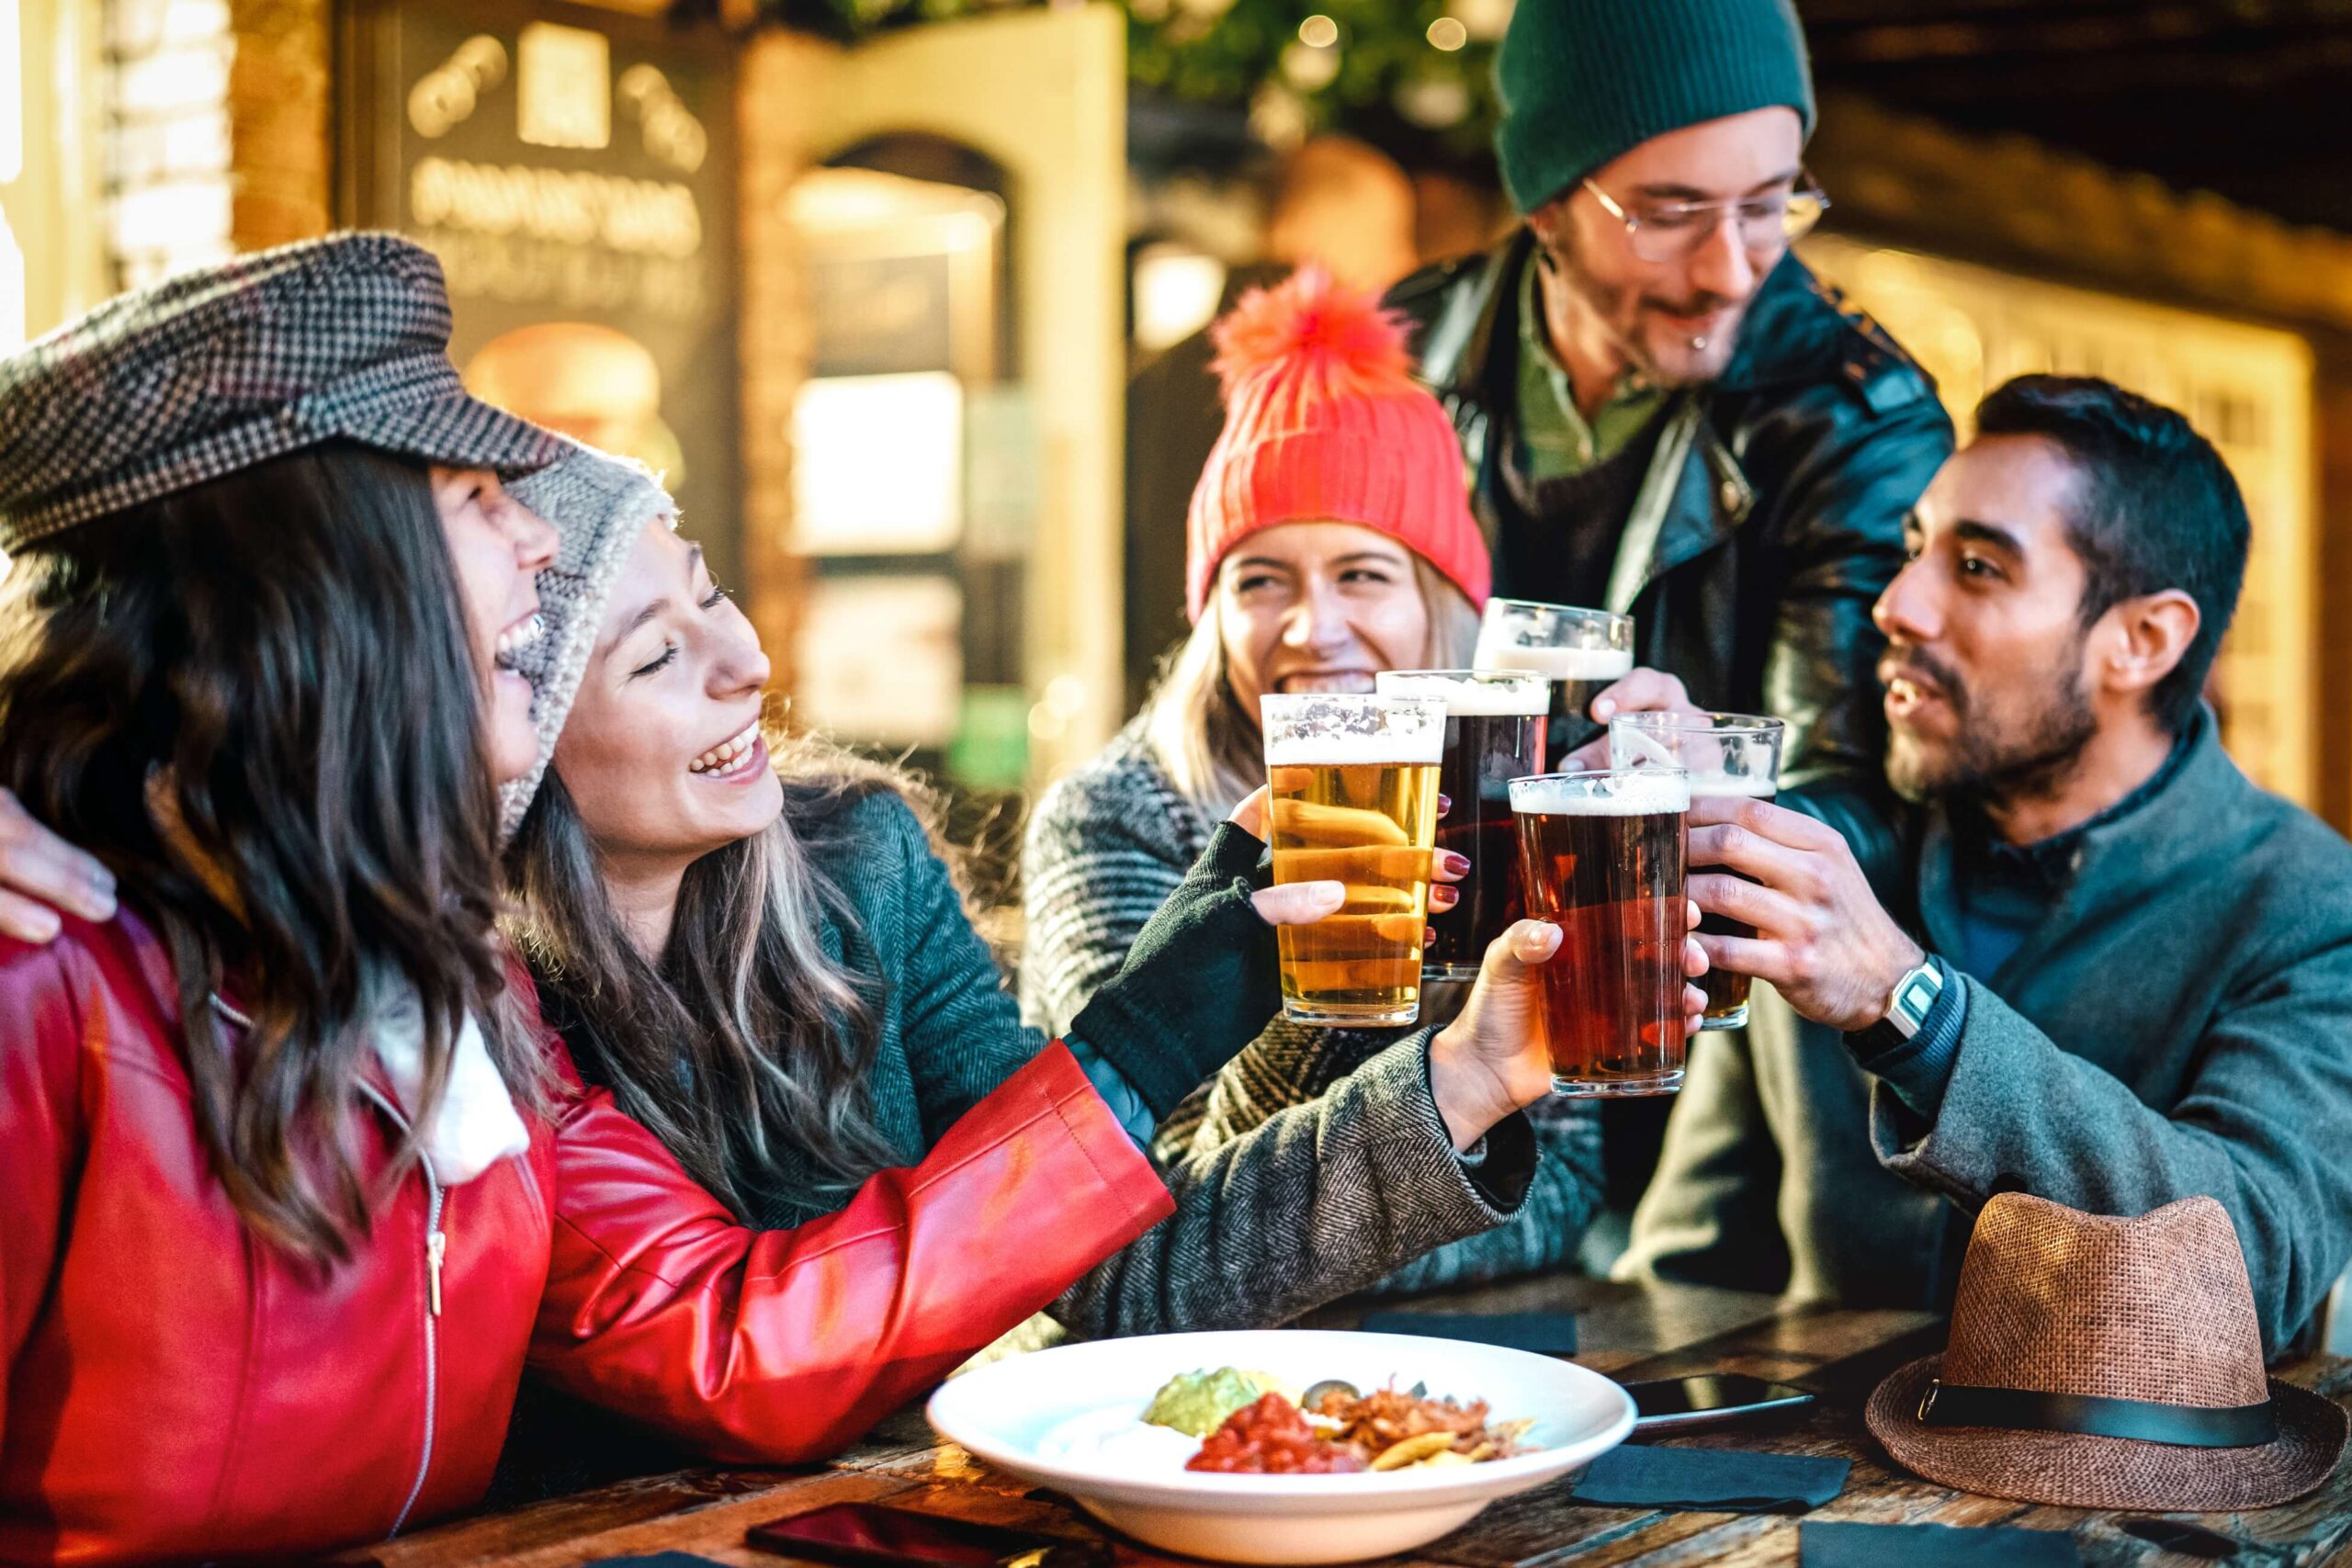 A lively group of friends raises their beers in a cheerful toast over a plate of food. Their vibrant winter attire adds to the festive atmosphere, and the big smiles on their faces capture the joy and excitement of their social gathering.